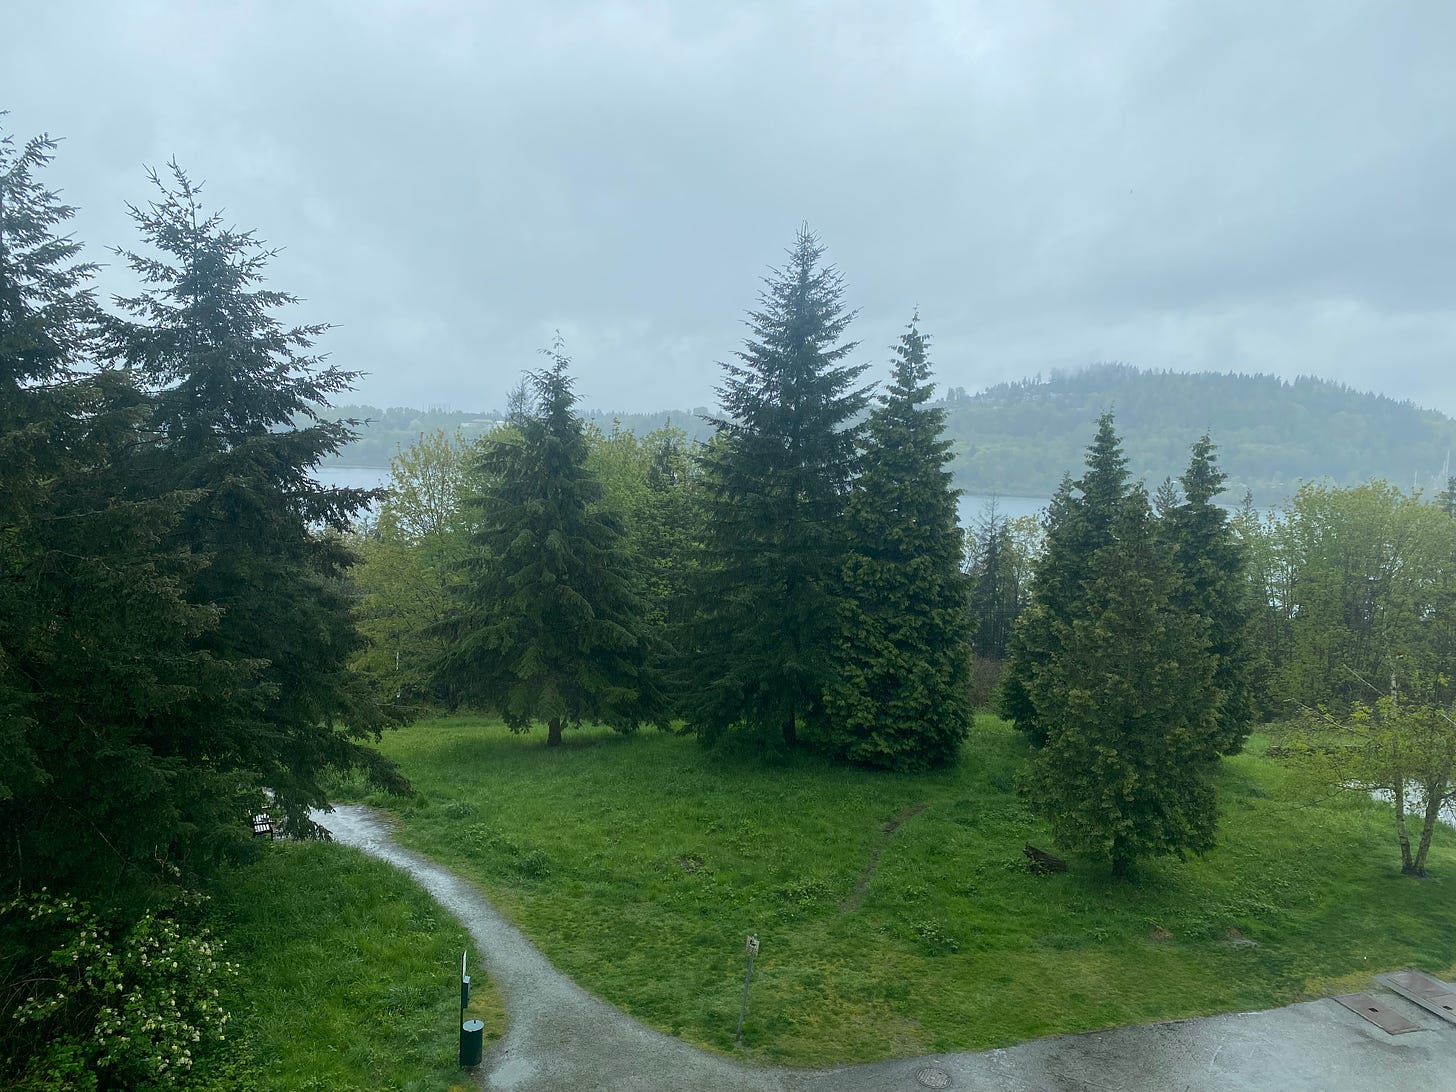 A rainy landscape: grey skies over a path through a small park with grass and evergreens. In the background is the inlet, and Capitol Hill in Burnaby, hazy through the rain.